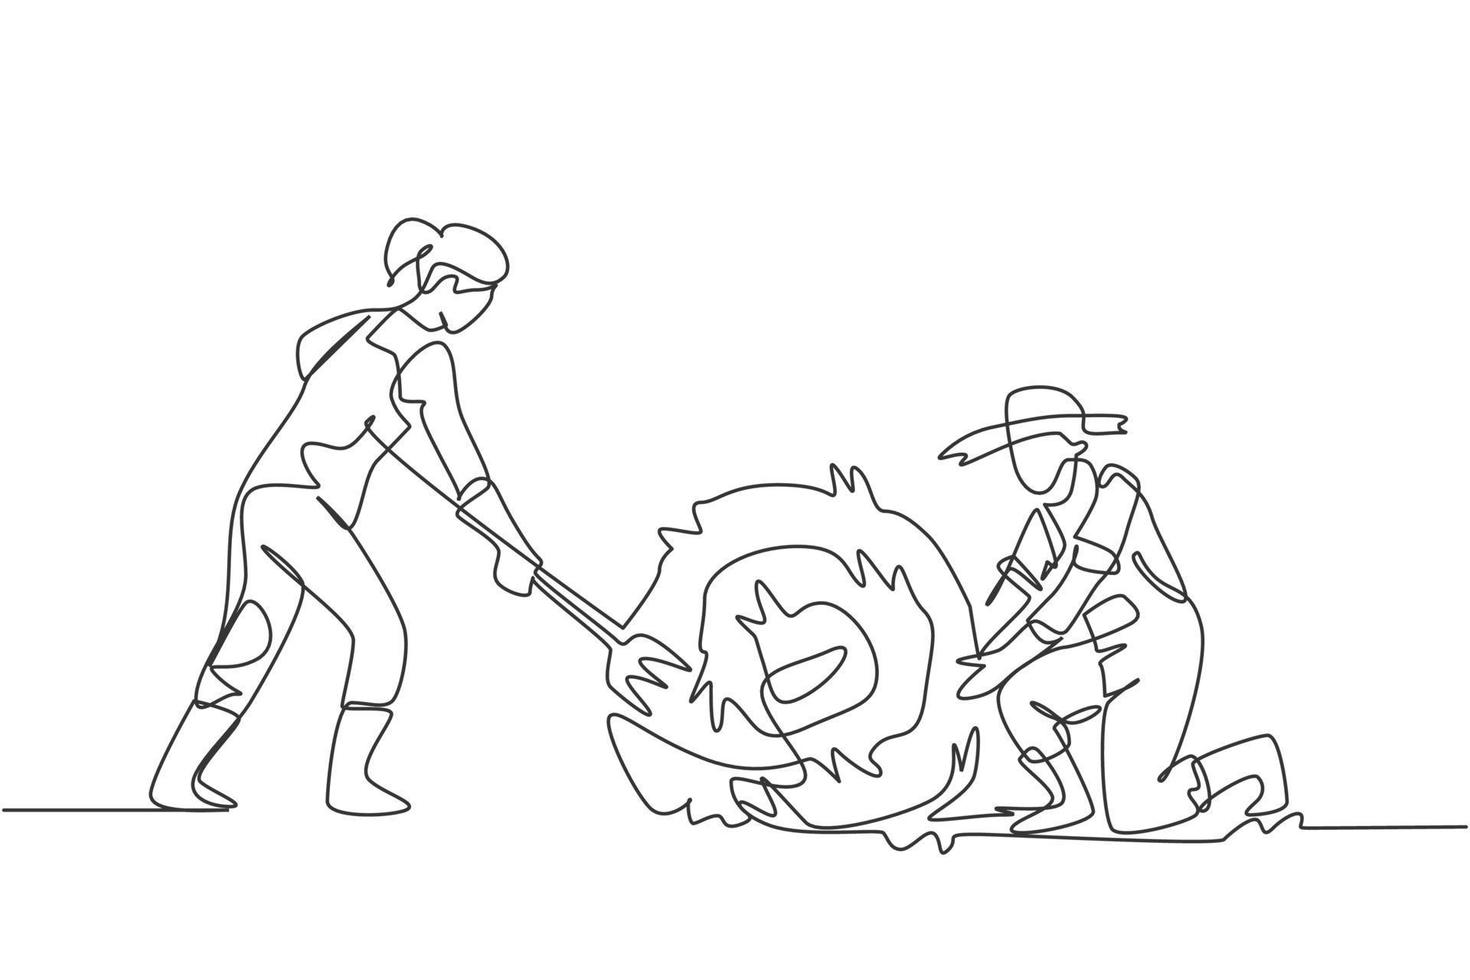 Single one line drawing female farmer was stabbing a haystack and rolling it with straw stick and the male farmer was helping her. Minimalism concept. One line draw design graphic vector illustration.